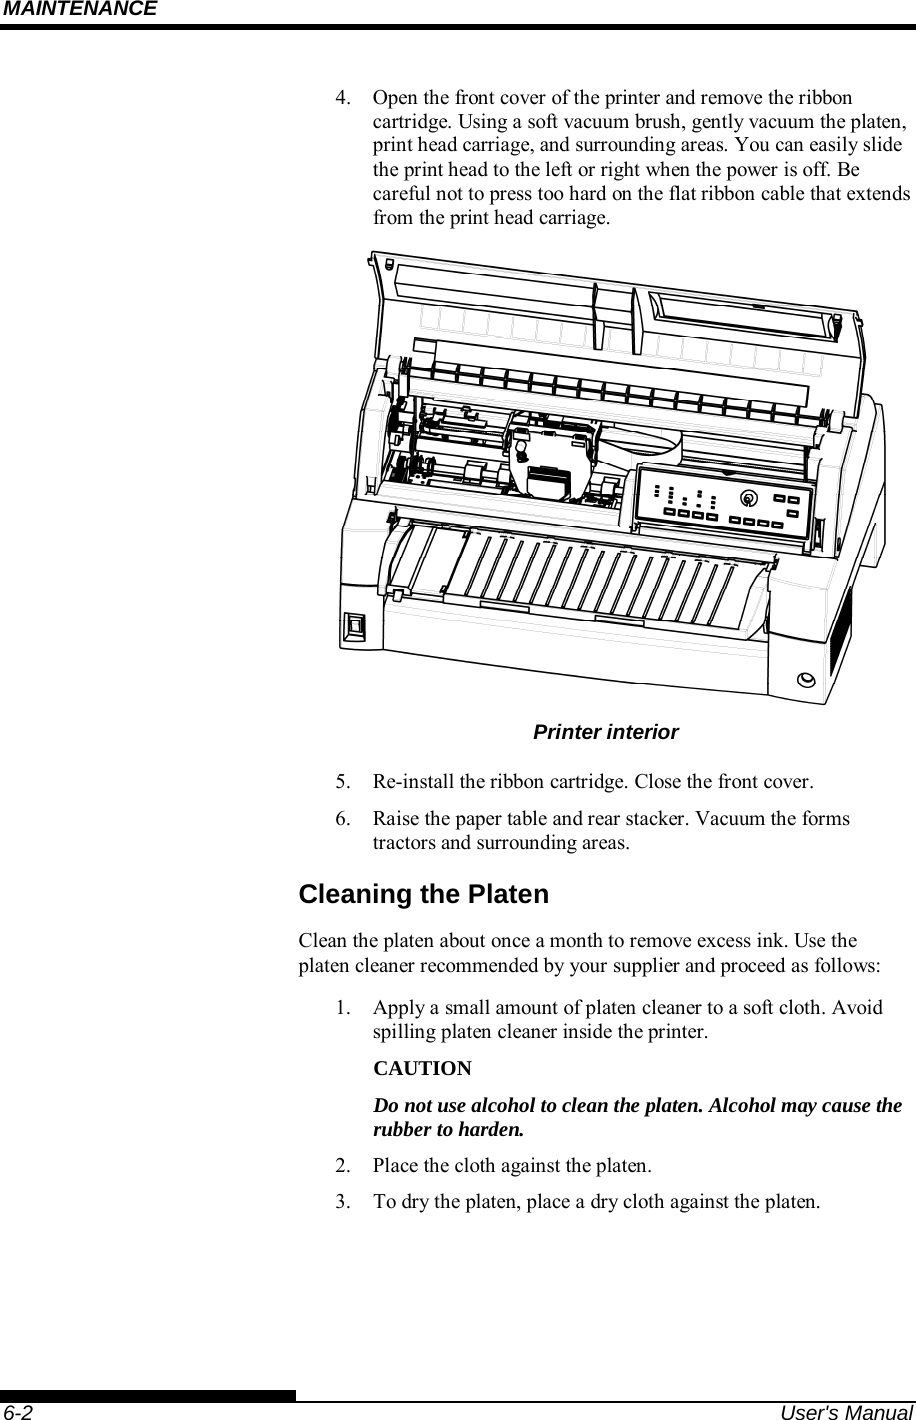 MAINTENANCE    6-2  User&apos;s Manual 4.  Open the front cover of the printer and remove the ribbon cartridge. Using a soft vacuum brush, gently vacuum the platen, print head carriage, and surrounding areas. You can easily slide the print head to the left or right when the power is off. Be careful not to press too hard on the flat ribbon cable that extends from the print head carriage.  Printer interior 5.  Re-install the ribbon cartridge. Close the front cover. 6.  Raise the paper table and rear stacker. Vacuum the forms tractors and surrounding areas. Cleaning the Platen Clean the platen about once a month to remove excess ink. Use the platen cleaner recommended by your supplier and proceed as follows: 1.  Apply a small amount of platen cleaner to a soft cloth. Avoid spilling platen cleaner inside the printer. CAUTION Do not use alcohol to clean the platen. Alcohol may cause the rubber to harden. 2.  Place the cloth against the platen. 3.  To dry the platen, place a dry cloth against the platen.  